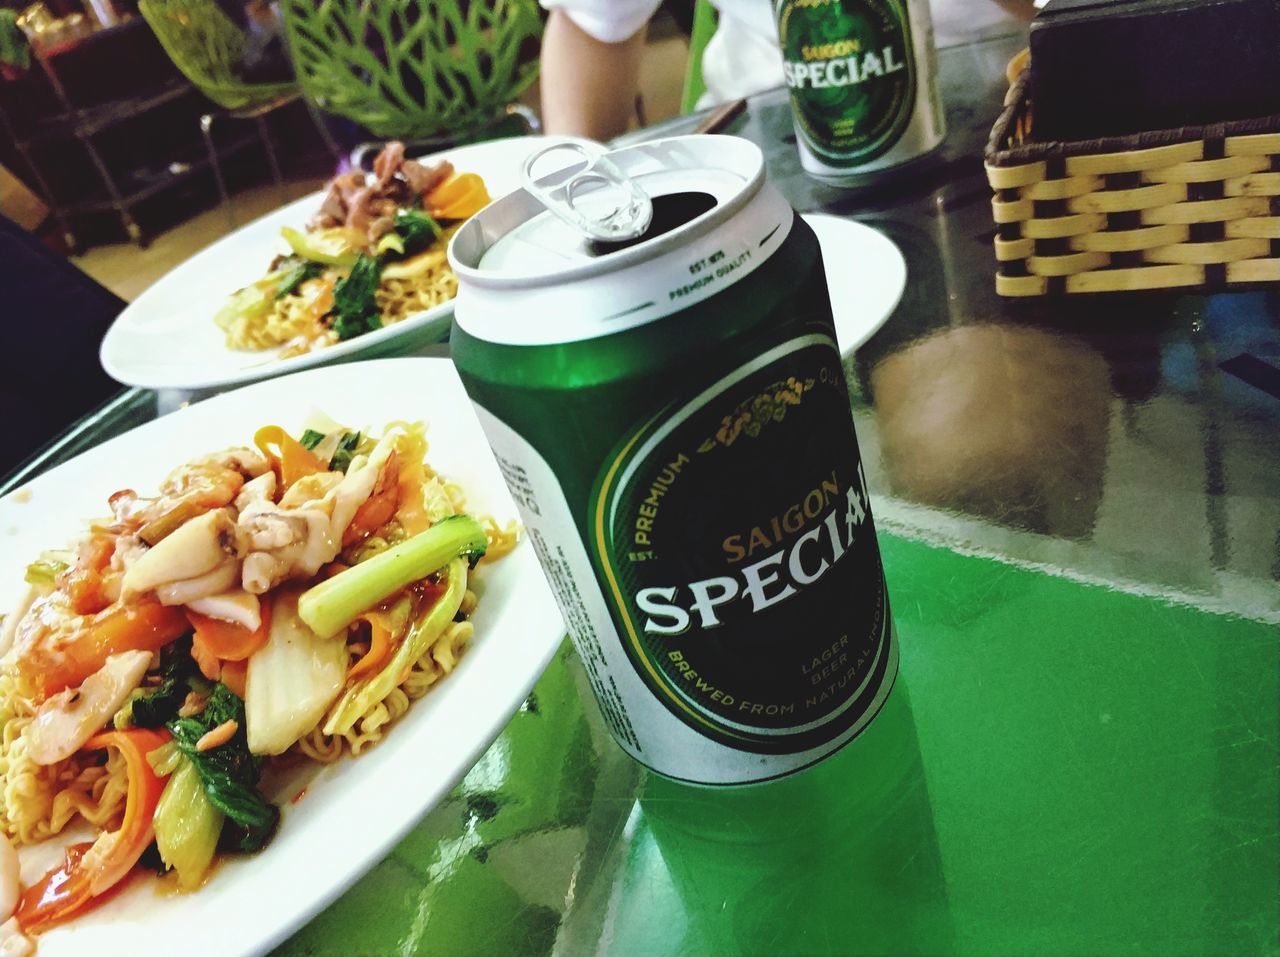 food and drink, freshness, food, table, plate, indoors, ready-to-eat, drink, green color, close-up, temptation, day, no people